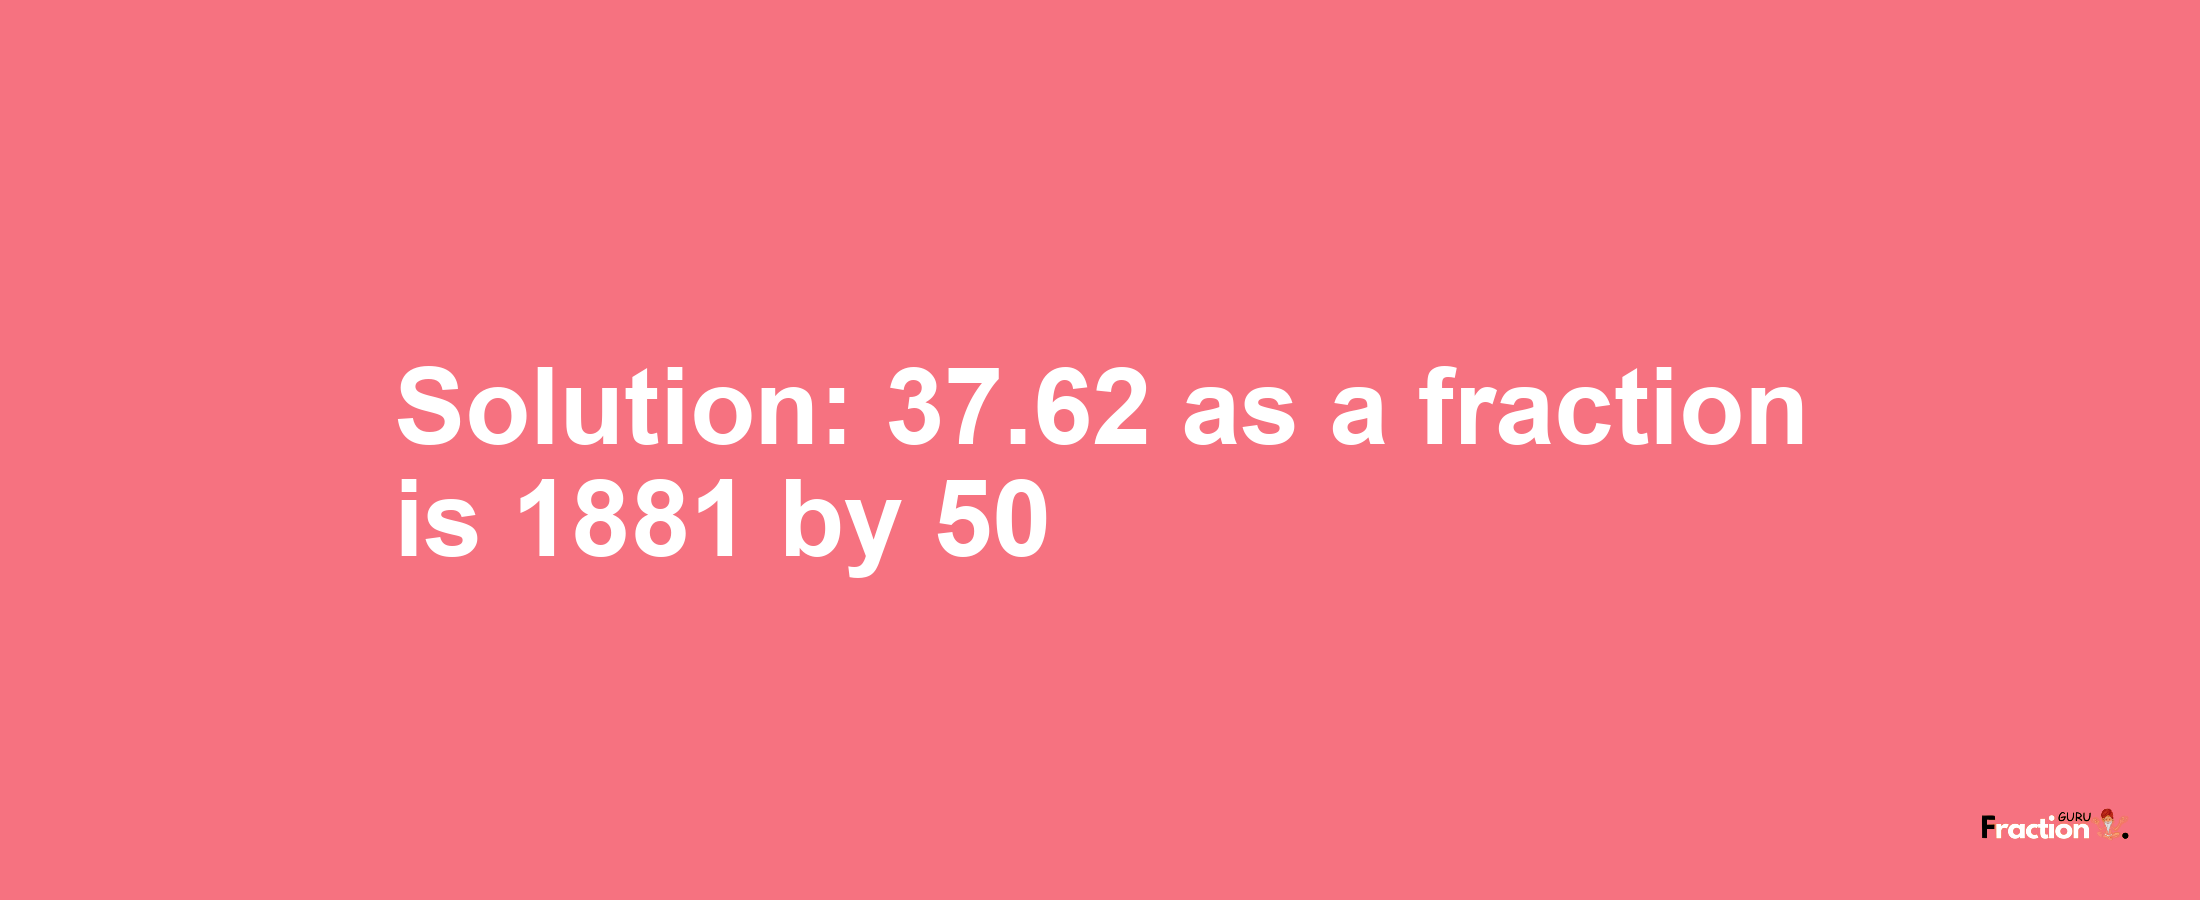 Solution:37.62 as a fraction is 1881/50